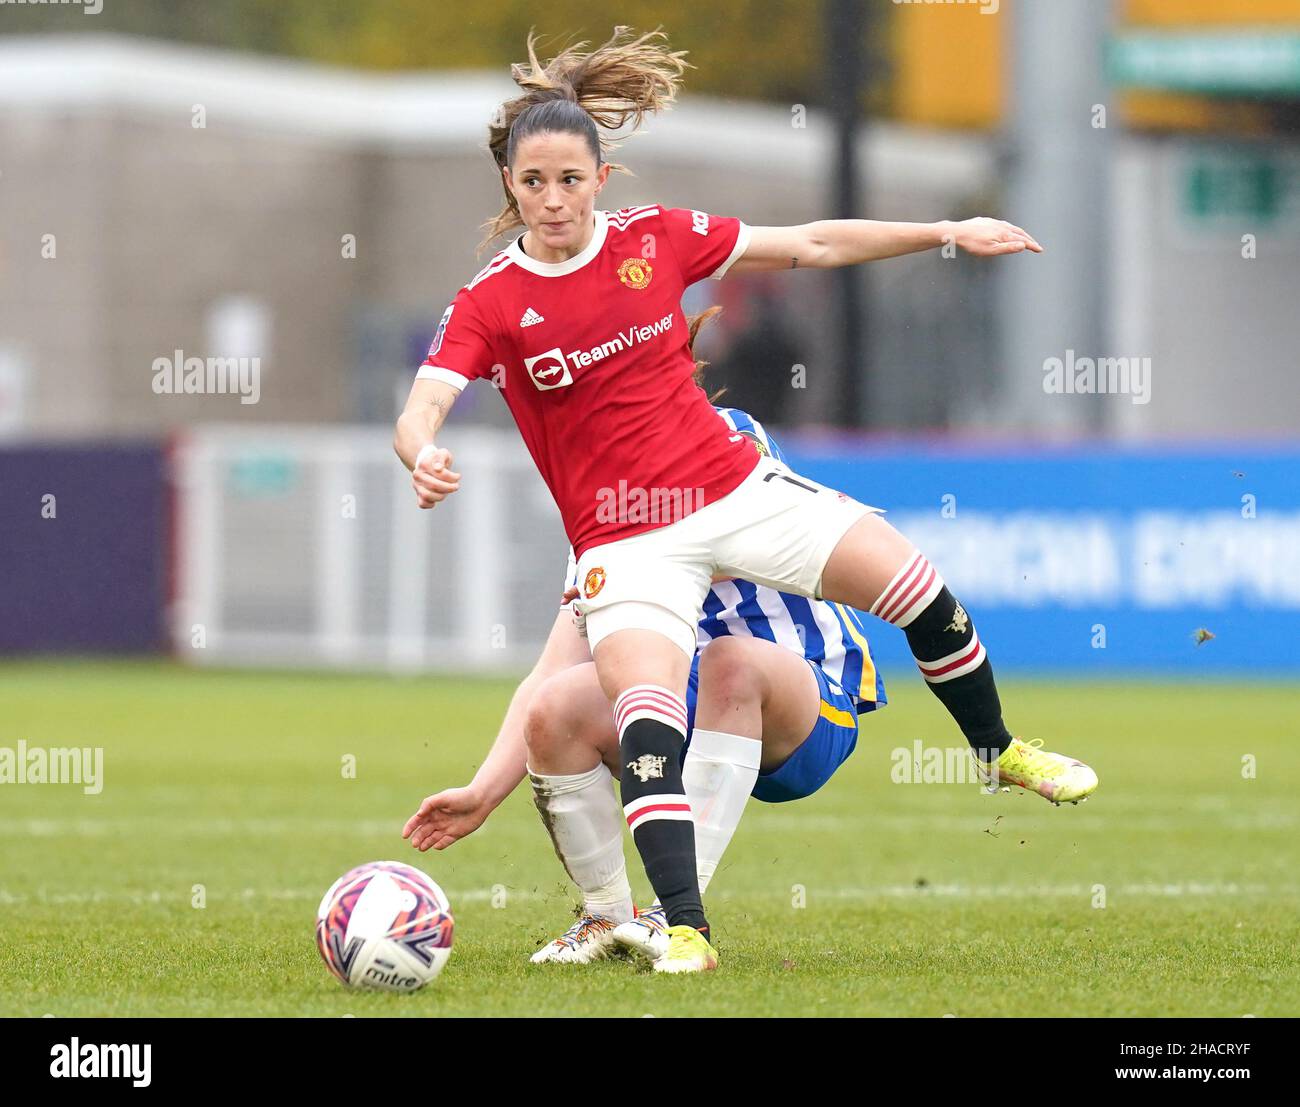 Manchester United's Ona Batlle (front) and Brighton and Hove Albion's Libby Bance battle for the ball during the Barclays FA Women's Super League match at The People's Pension Stadium, Brighton. Picture date: Sunday December 12, 2021. Stock Photo